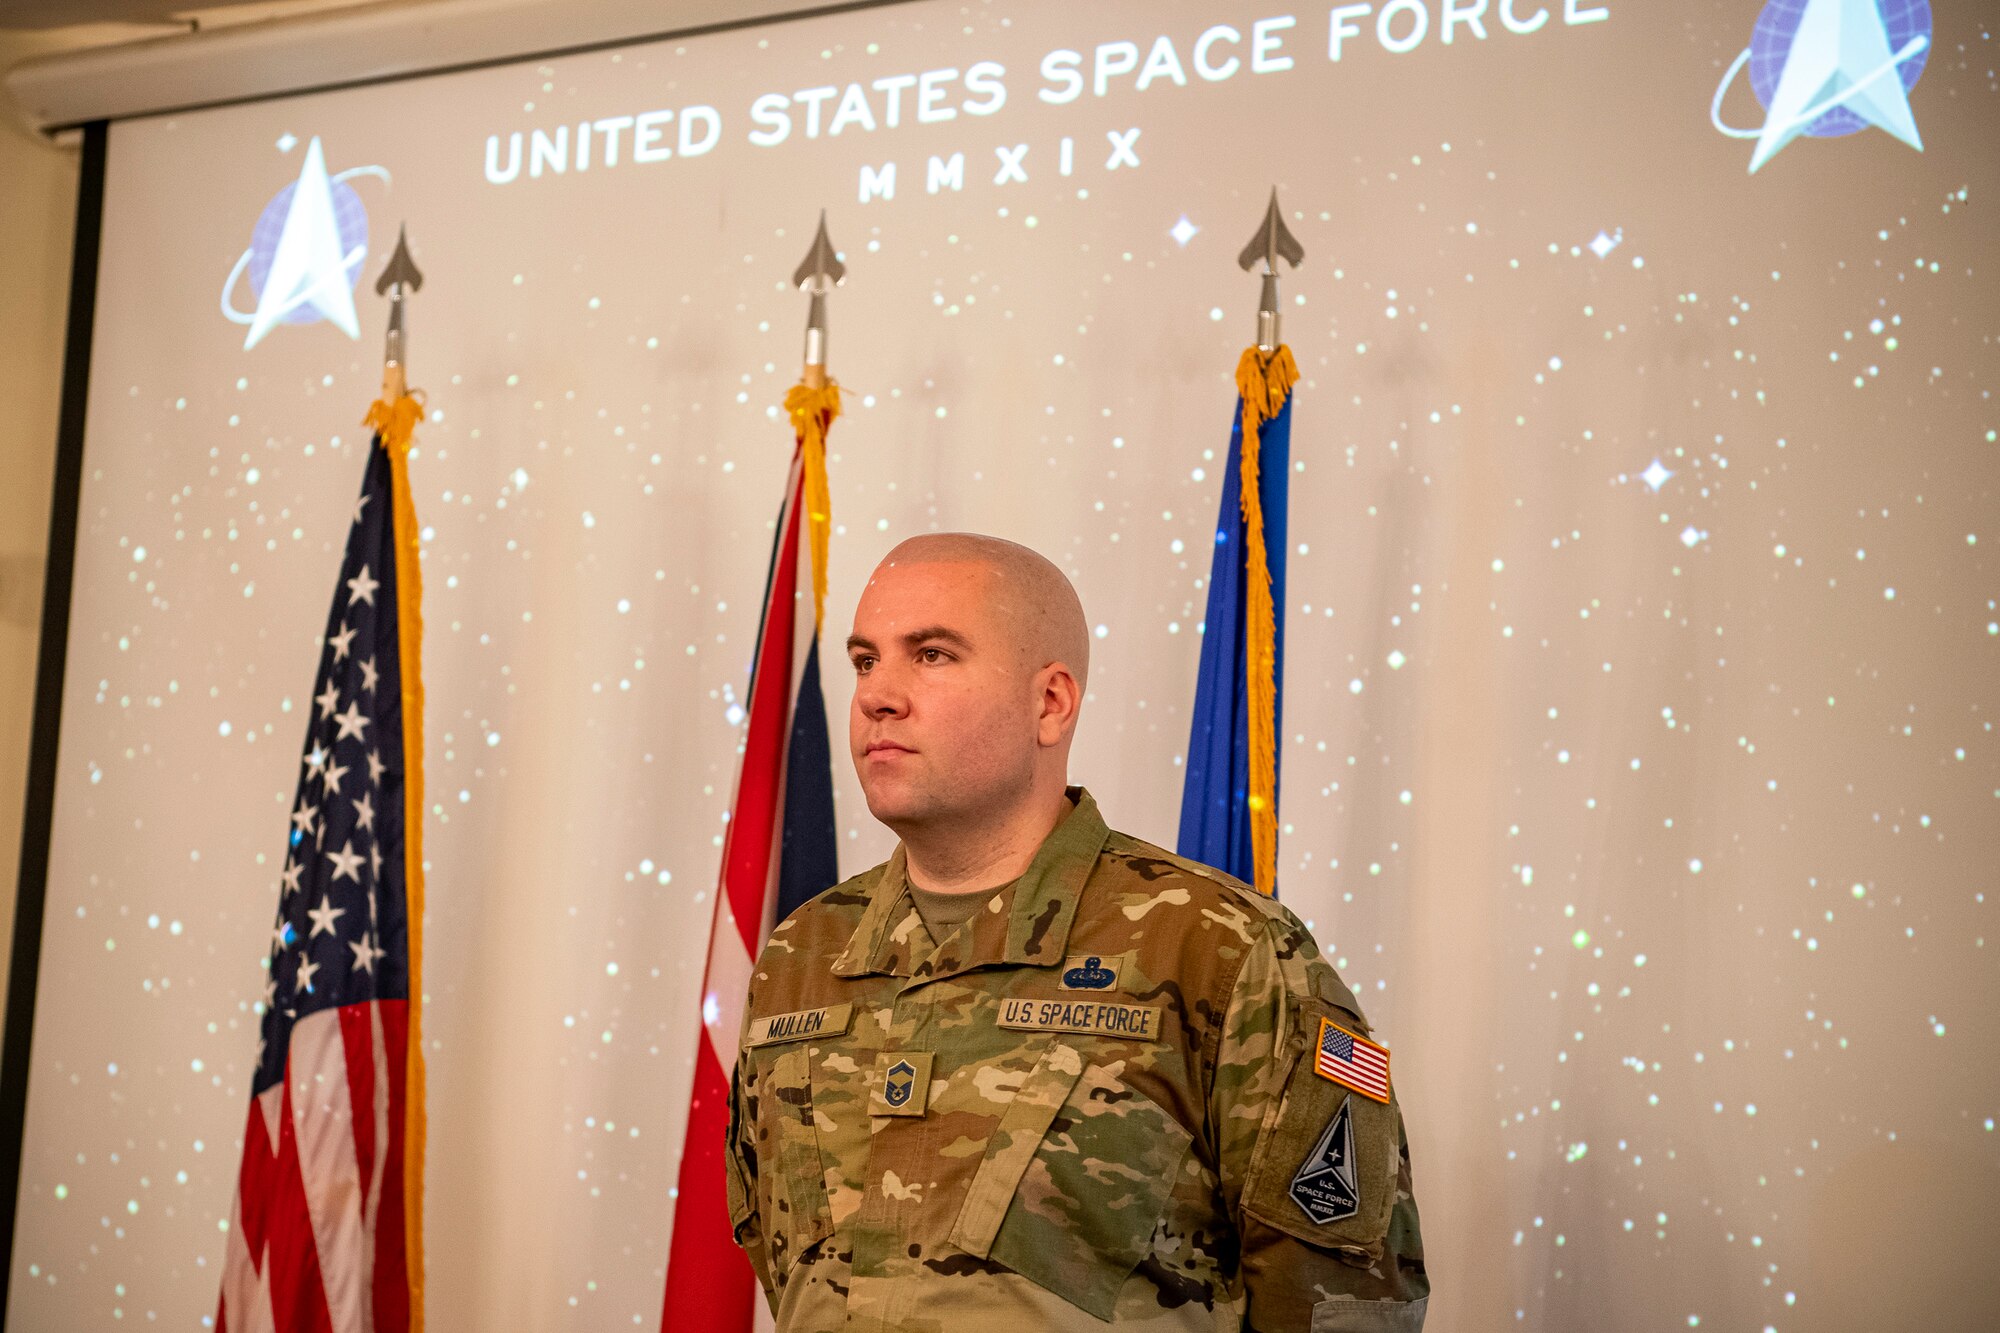 U.S. Air Force Senior Master Sgt. Kyle Mullen, 423rd Communications Squadron superintendent, stands at attention during a United States Space Force induction ceremony at RAF Alconbury, England, Dec. 18, 2020. Mullen became the first Airman from the 501st Combat Support Wing to transition into the USSF. (U.S. Air Force photo by Senior Airman Eugene Oliver)